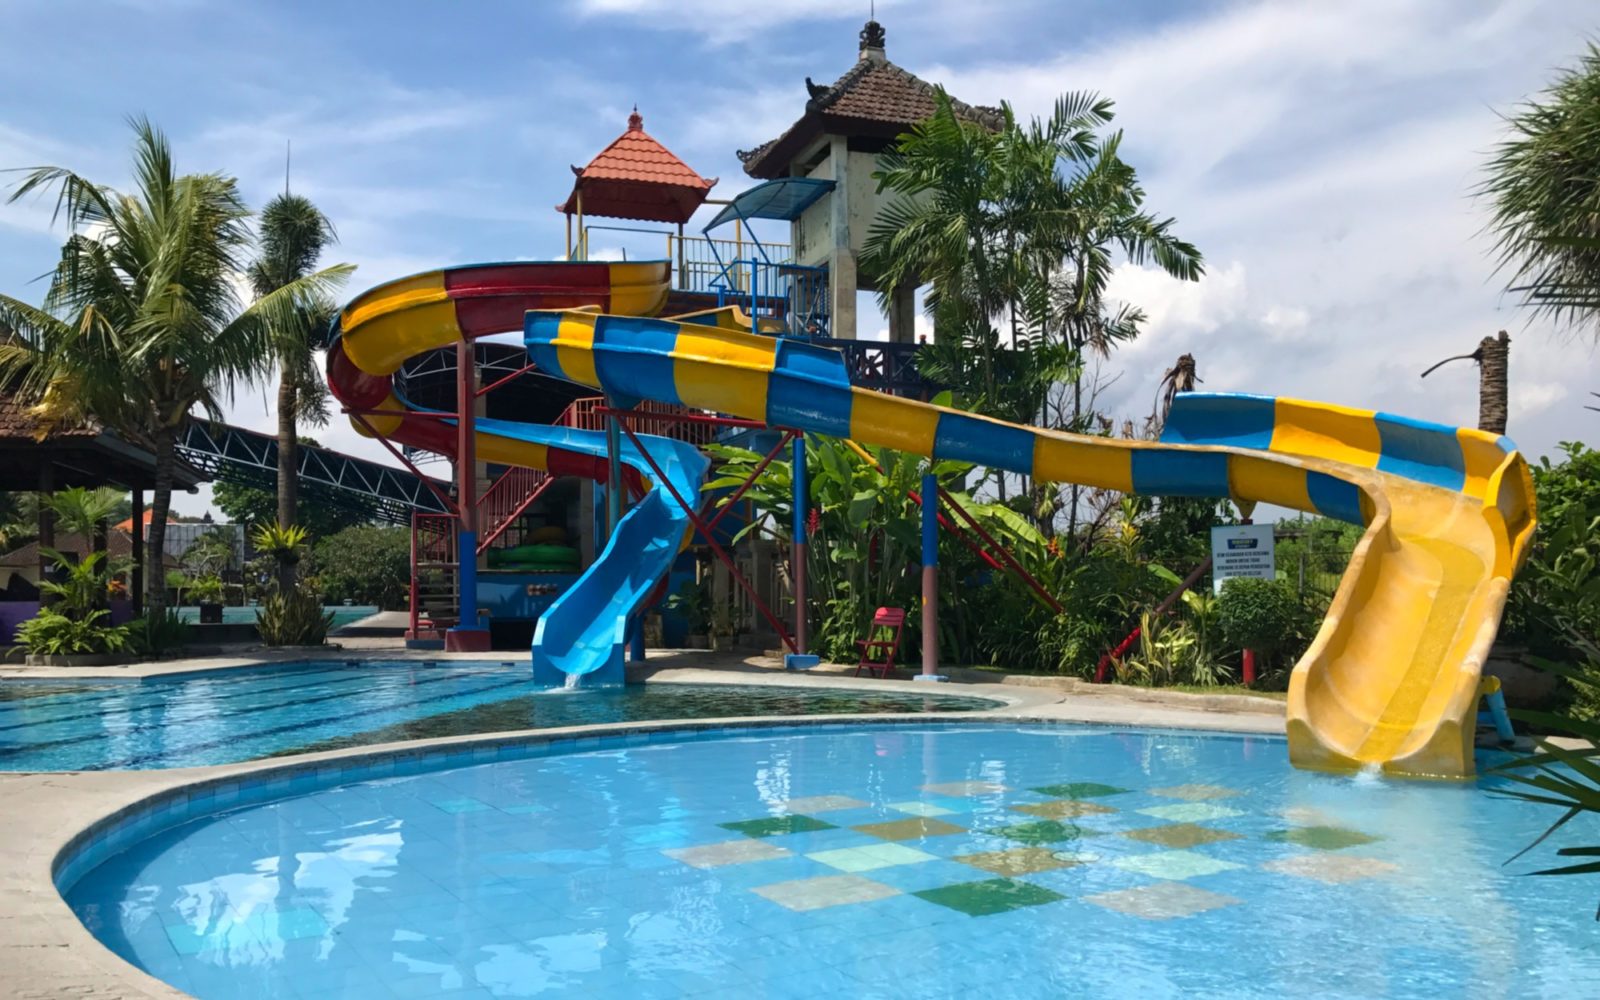 Taman Segara Madu Water Park in Indonesia, Central Asia | Water Parks - Rated 3.5